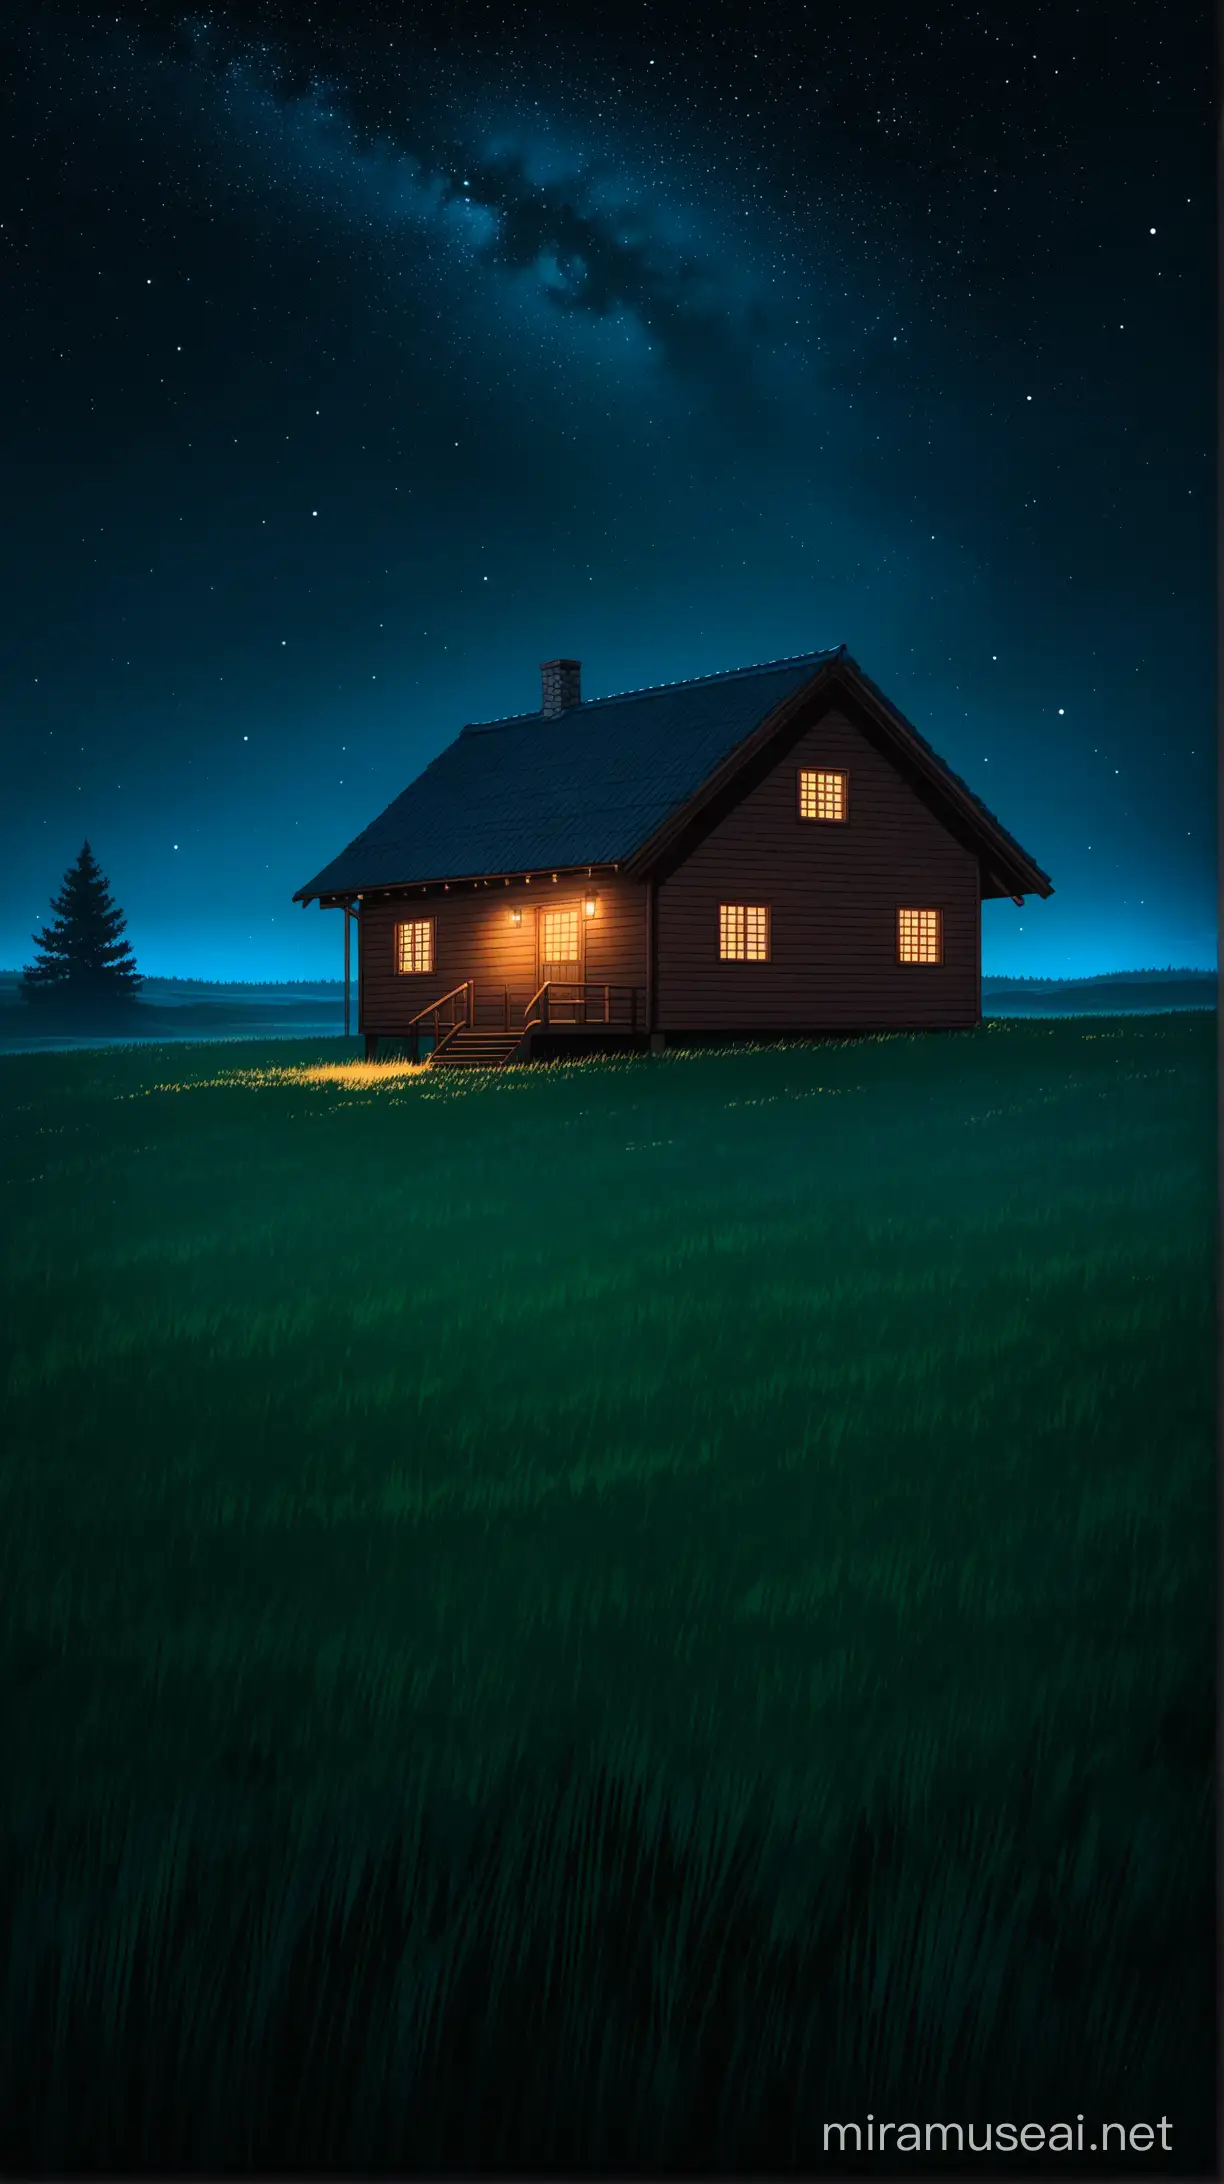 mid of grassland a alone wooden cottage house dark night sky in 